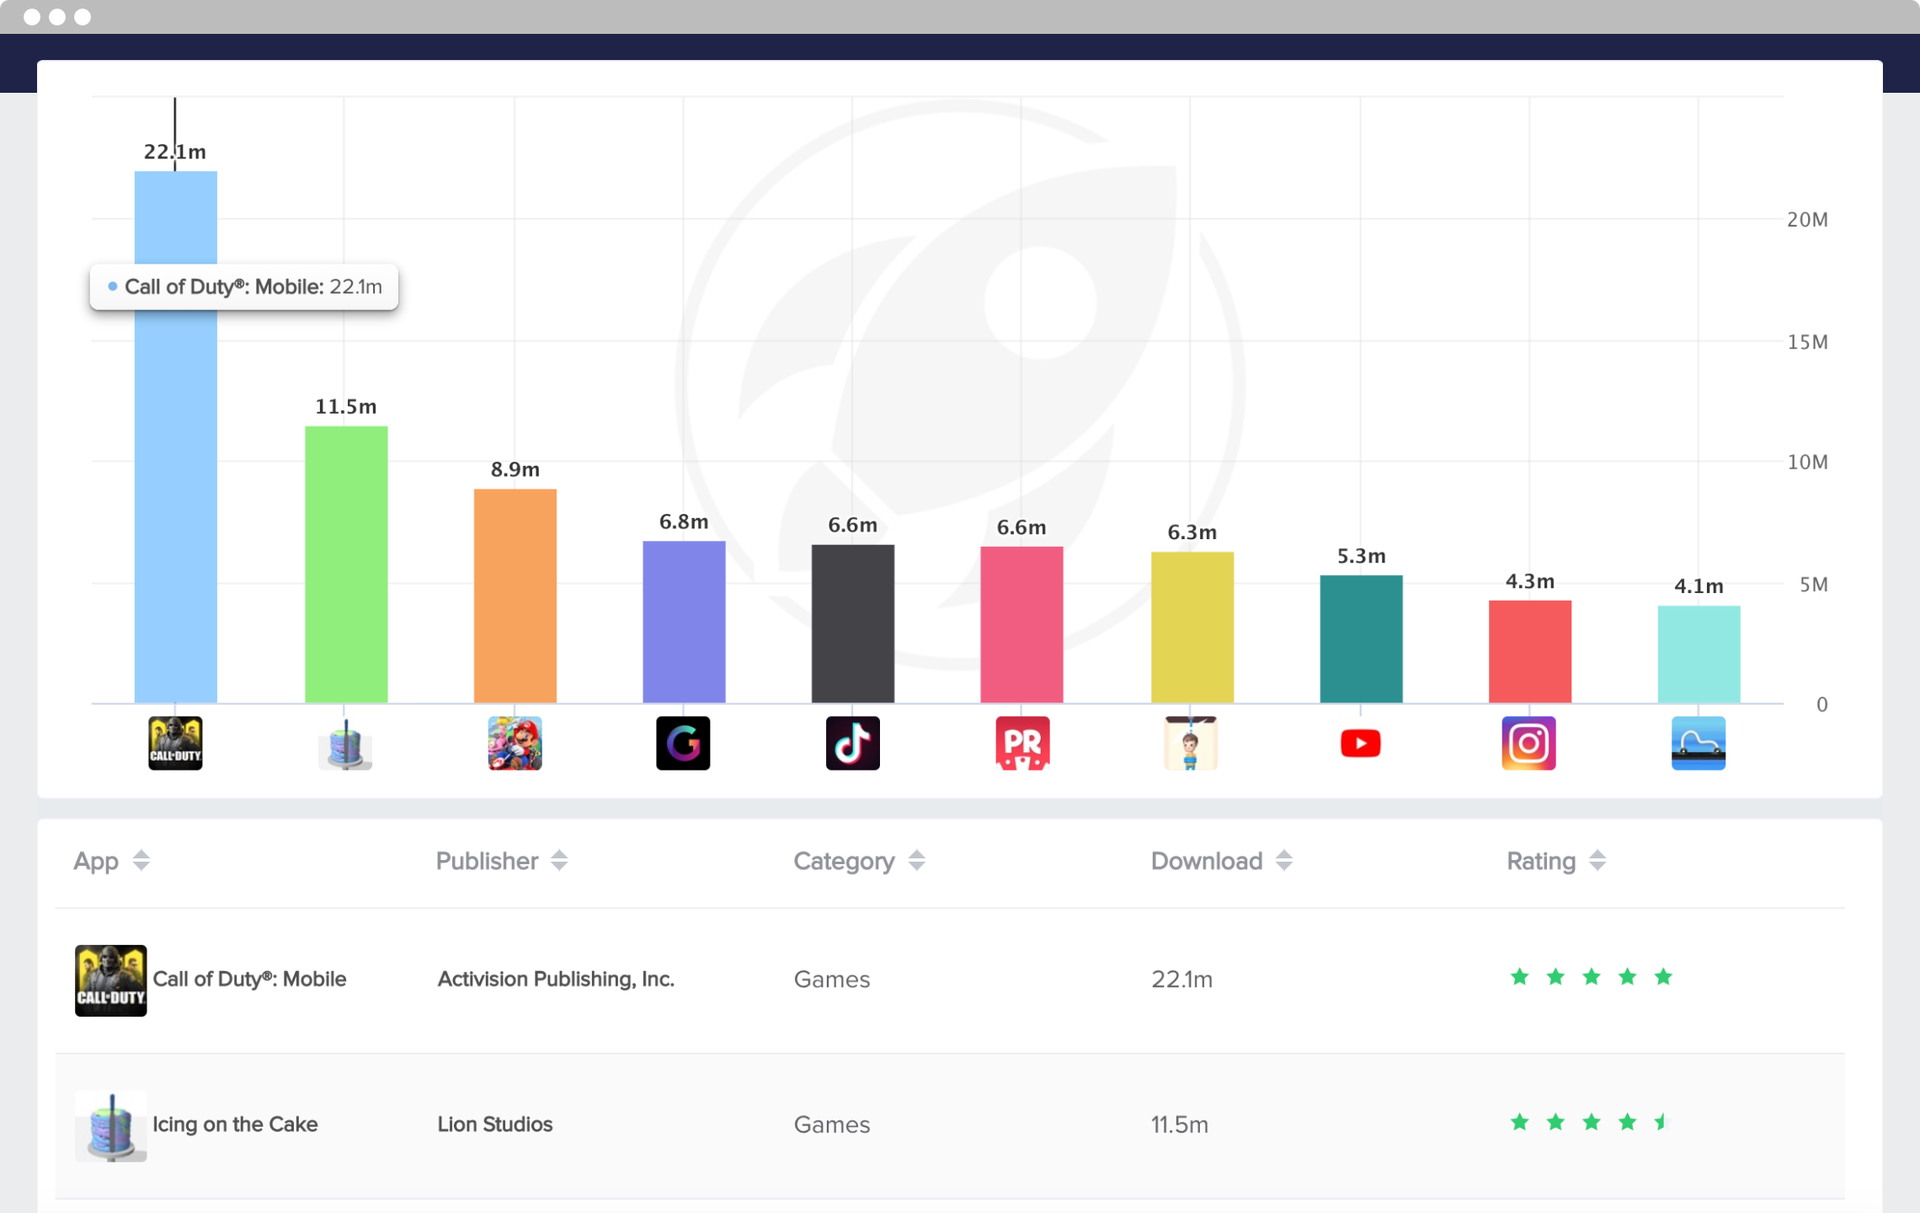 MobileAction's Market Intelligence Product Top Apps and Publishers Tool